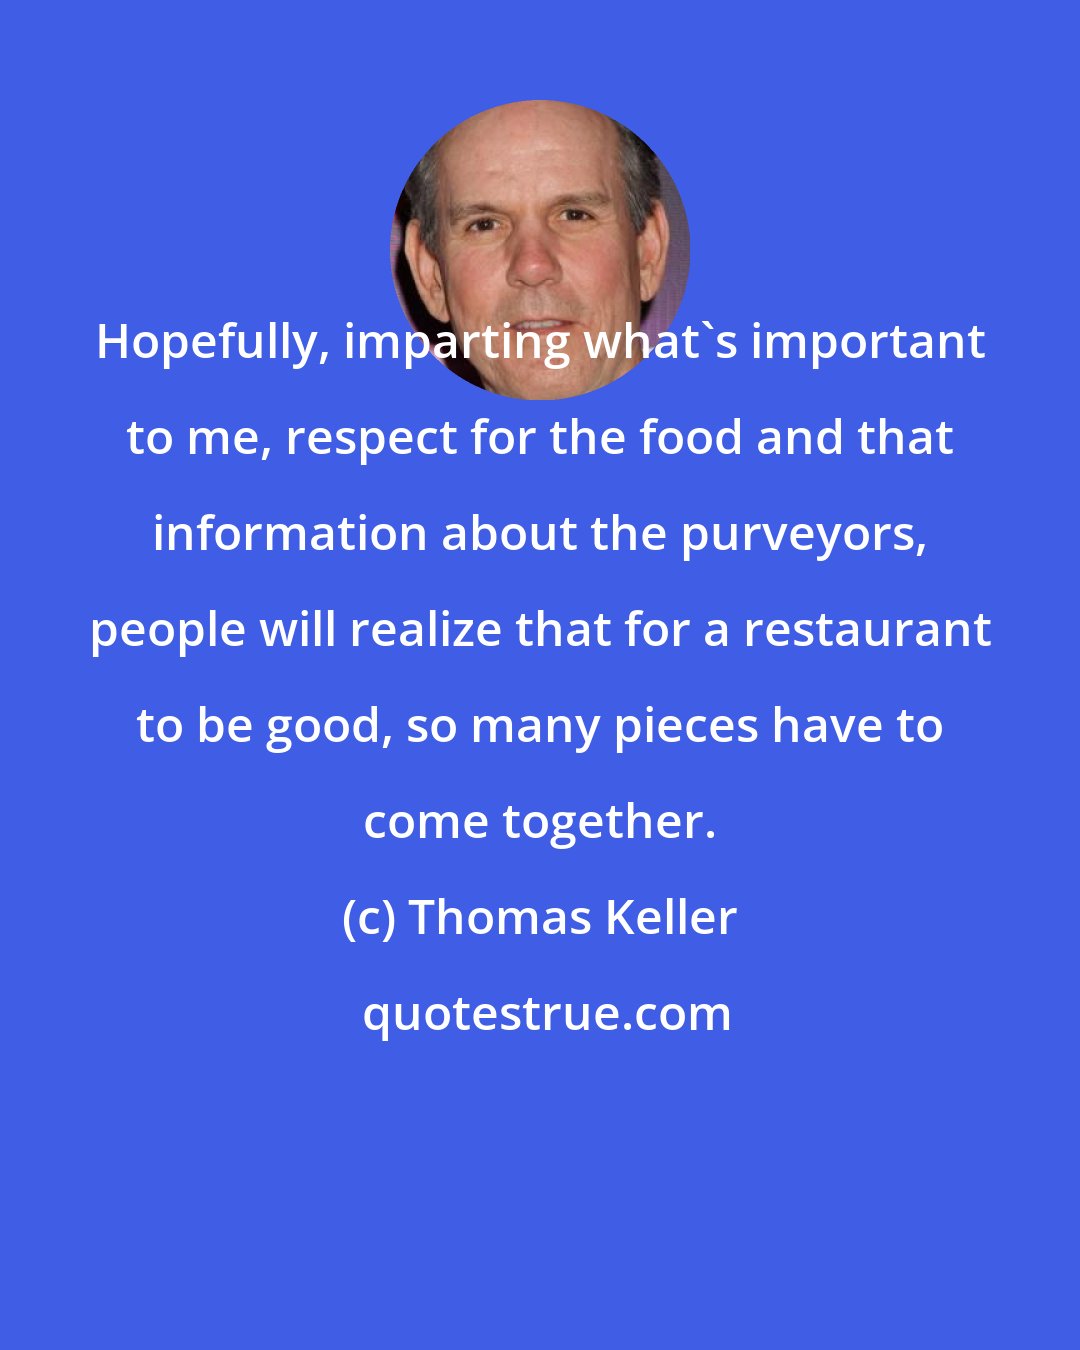 Thomas Keller: Hopefully, imparting what's important to me, respect for the food and that information about the purveyors, people will realize that for a restaurant to be good, so many pieces have to come together.